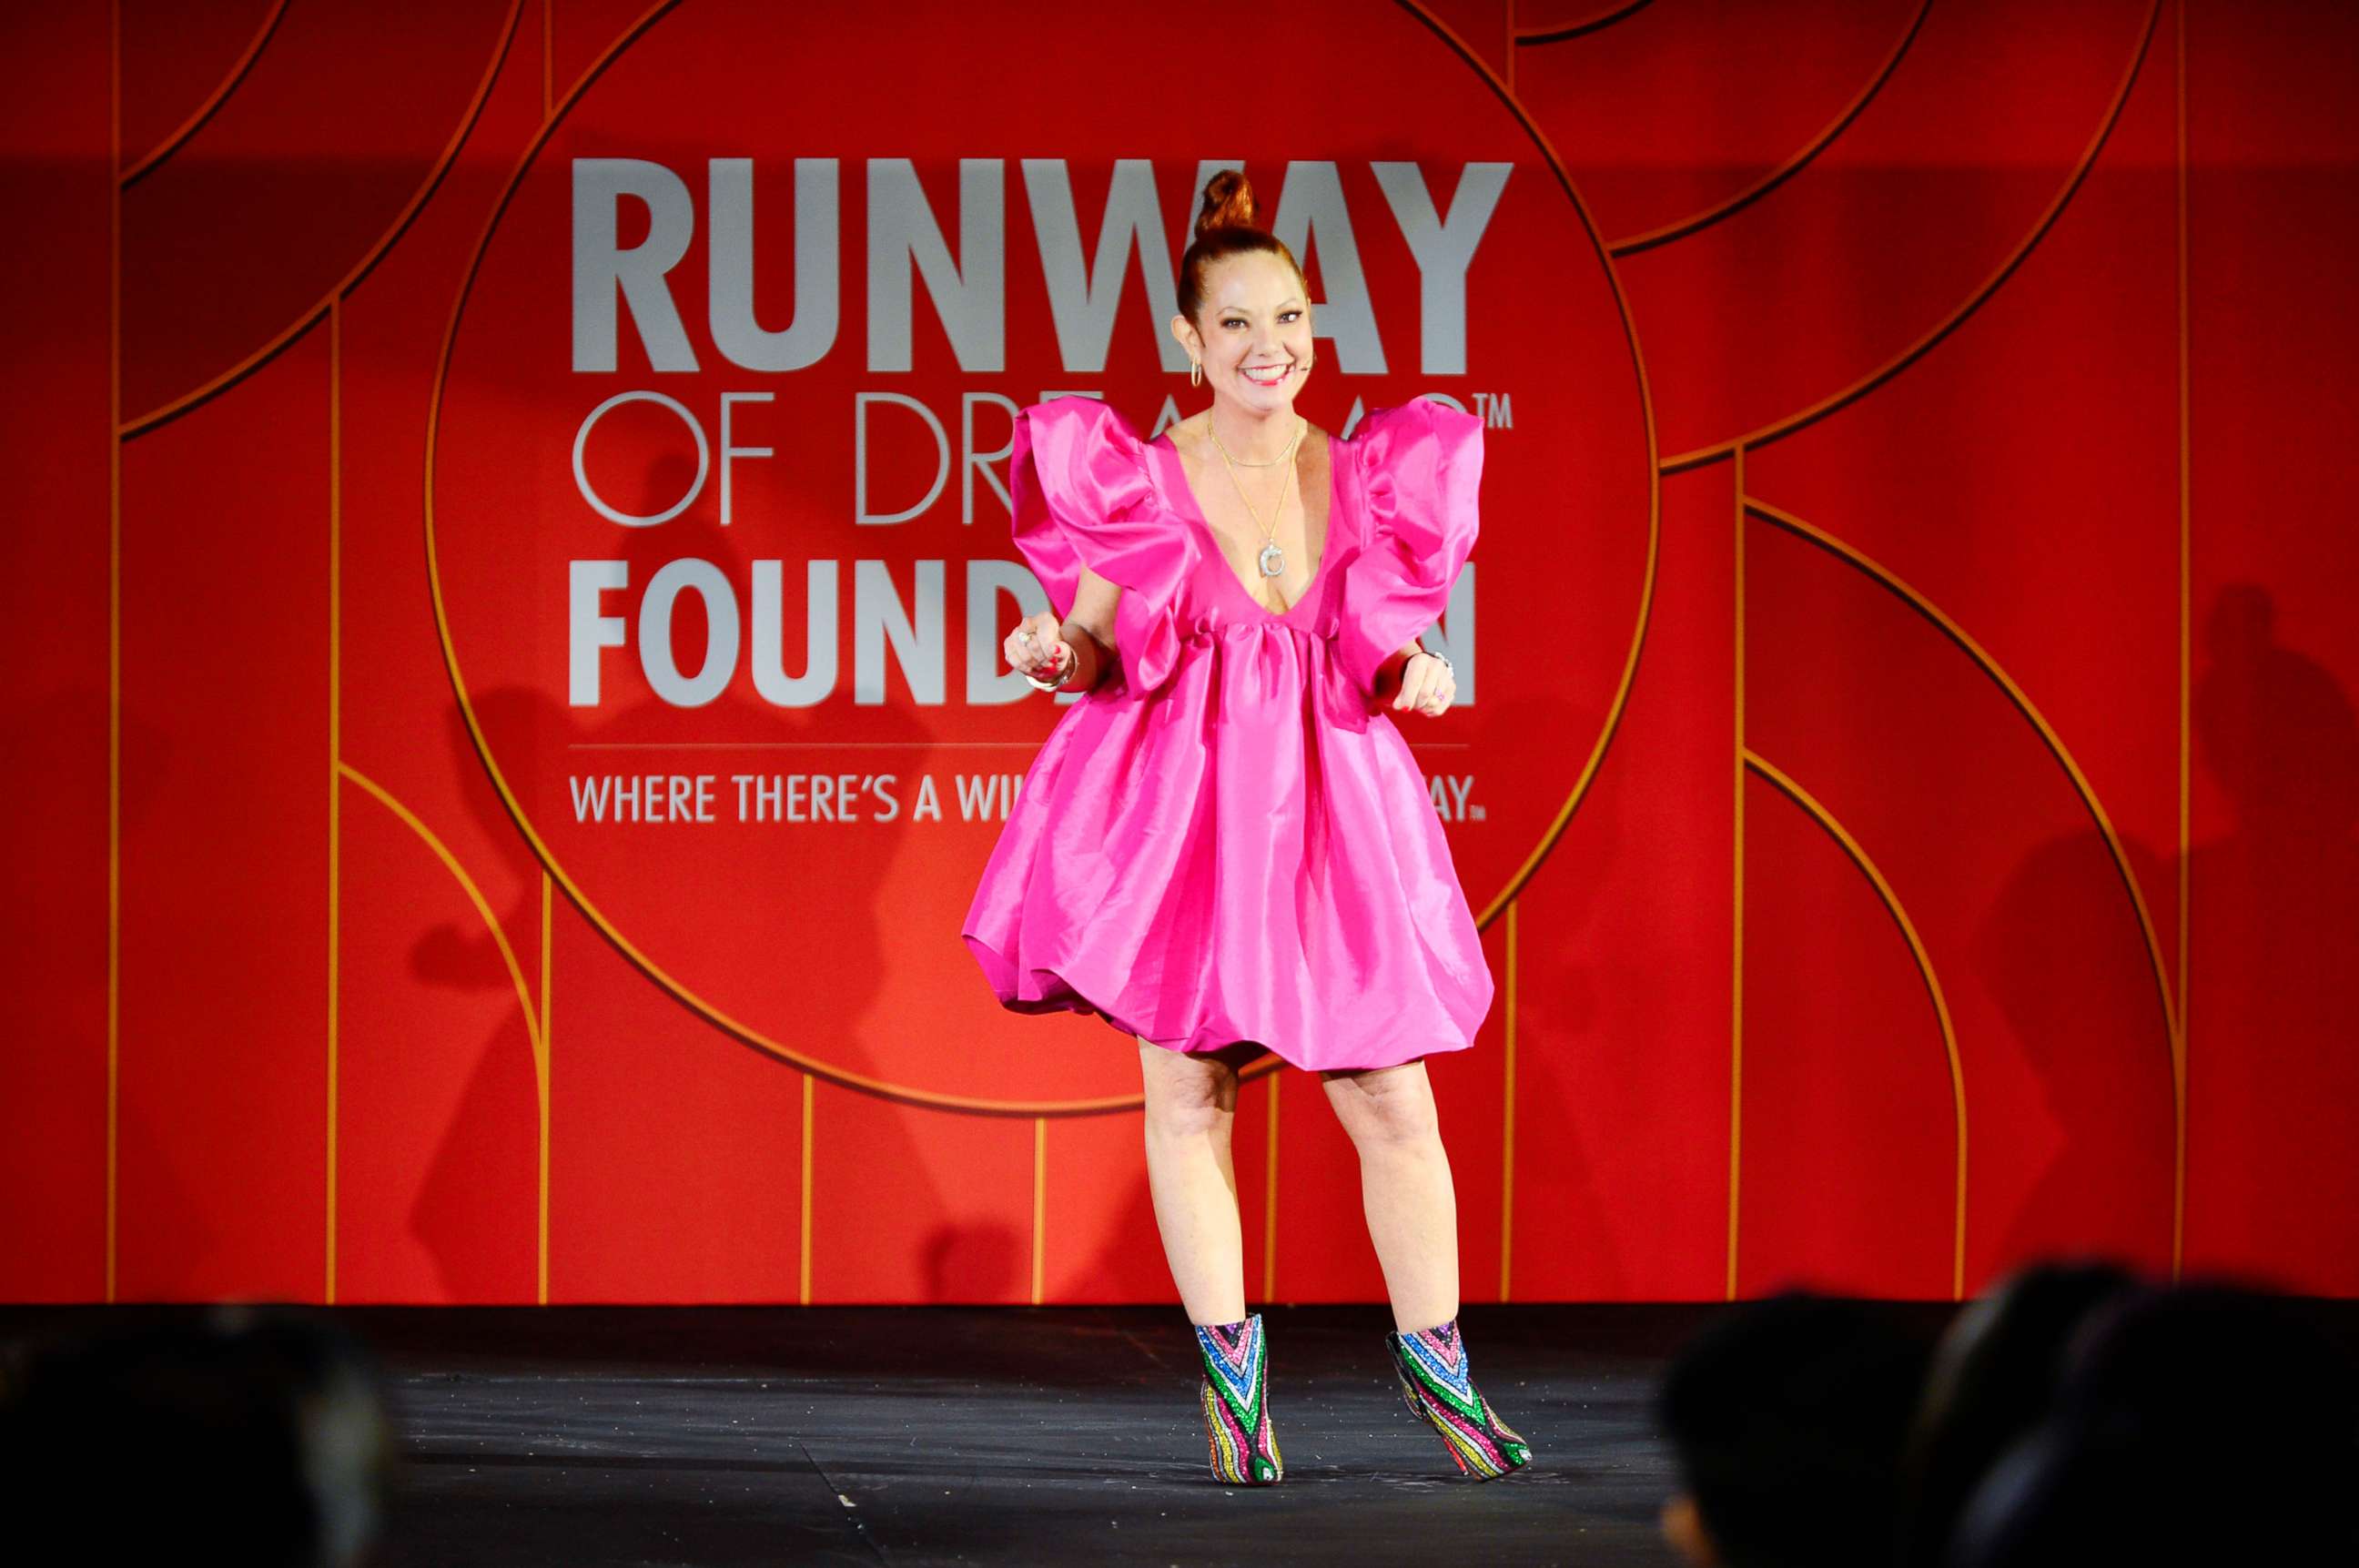 PHOTO: Runway of Dreams Founder and CEO Mindy Scheier speaks onstage during A Fashion Revolution by Runway of Dreams at The Majestic Downtown in Los Angeles, March 08, 2022.